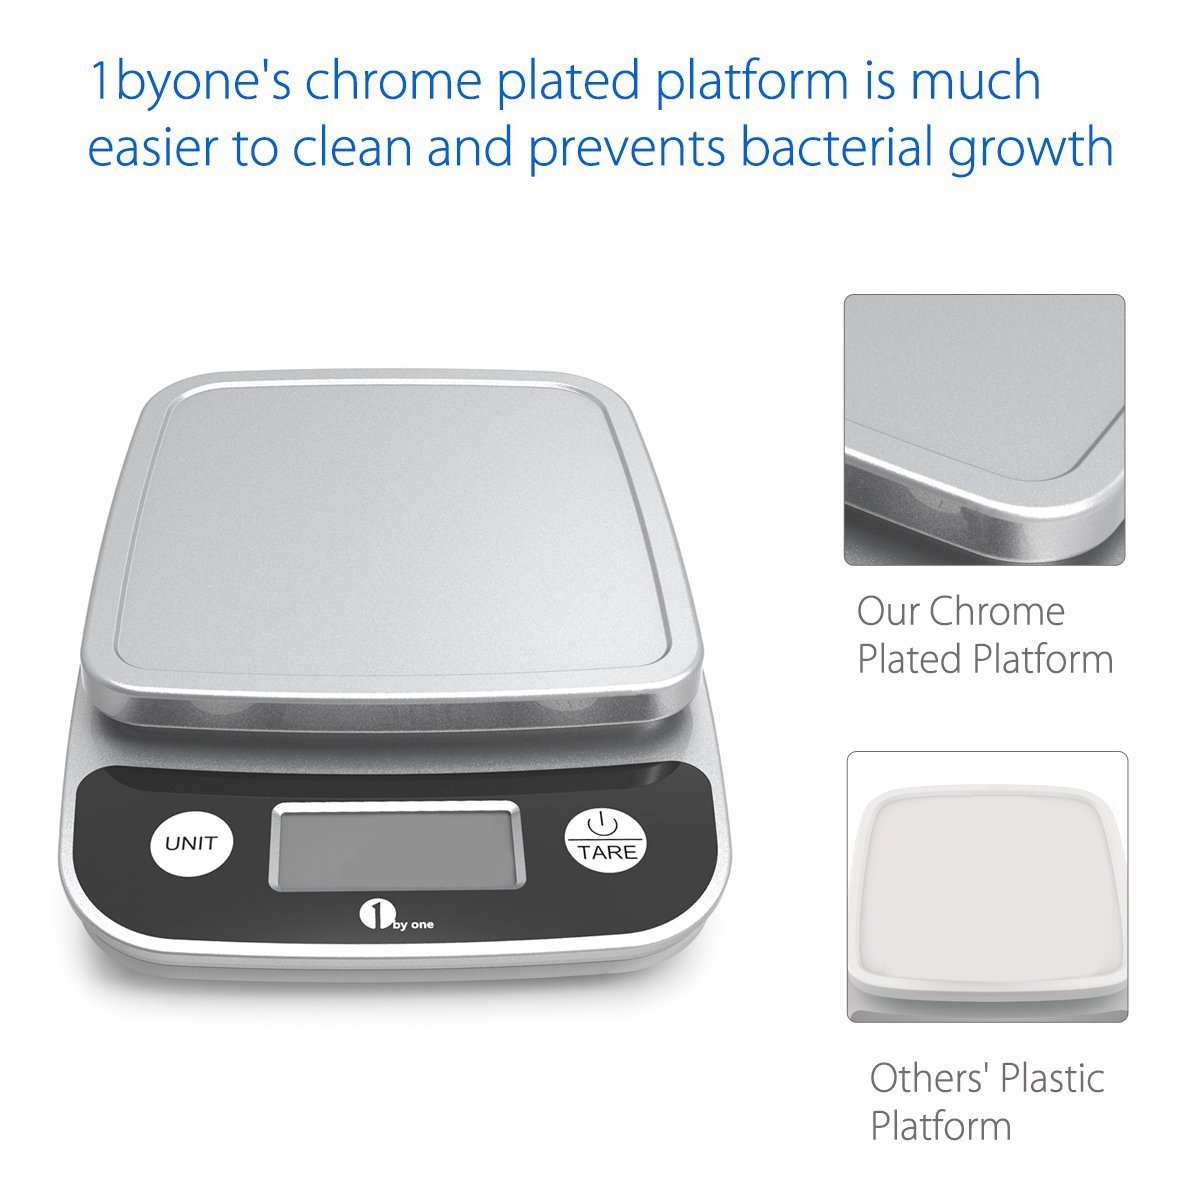 1byone Digital Kitchen Scale Precise Cooking Scale and Baking Scale, Multifunction with Range From 0.04oz (1g) to 11lbs, Elegant Black